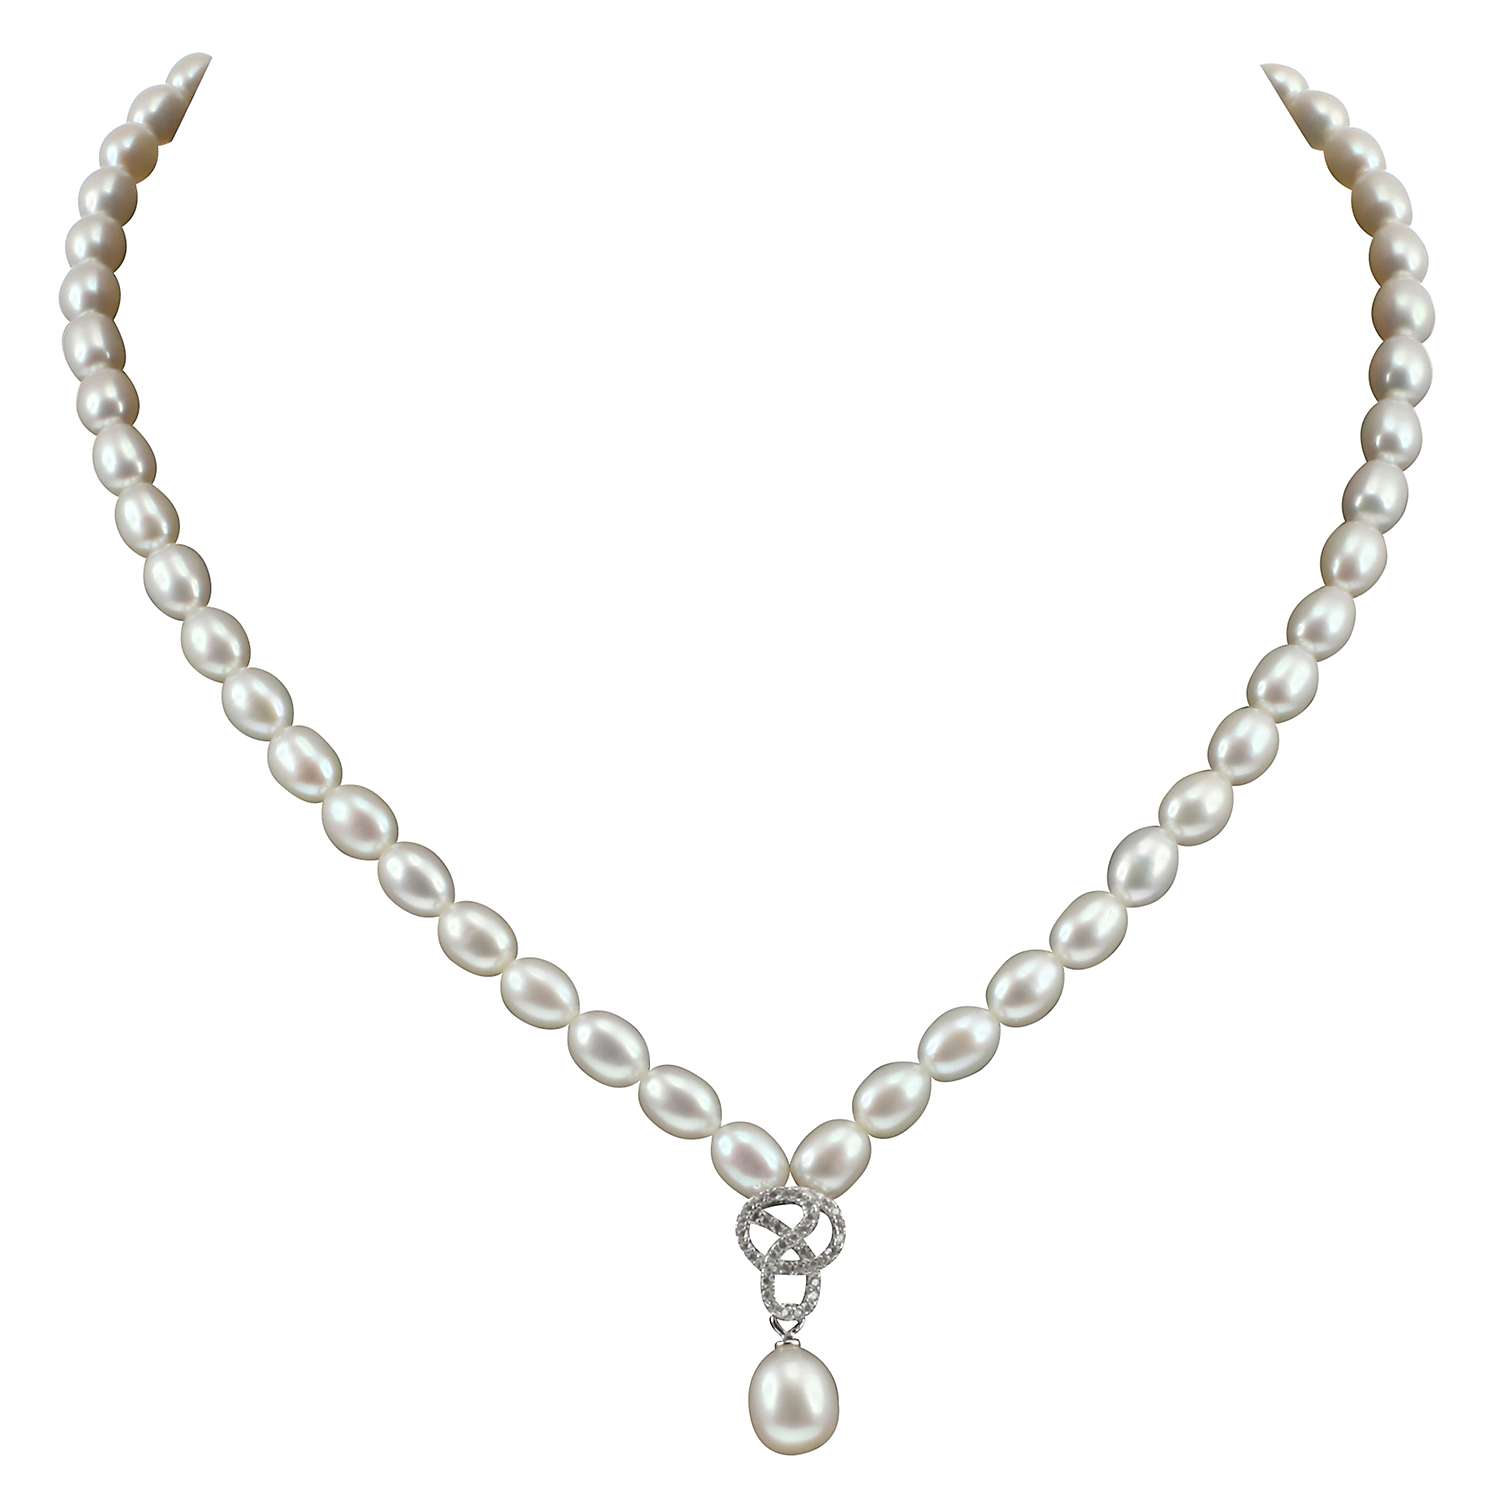 Buy Lido Freshwater Rice Pearl Knot Swirl Drop Collar Necklace, White Online at johnlewis.com